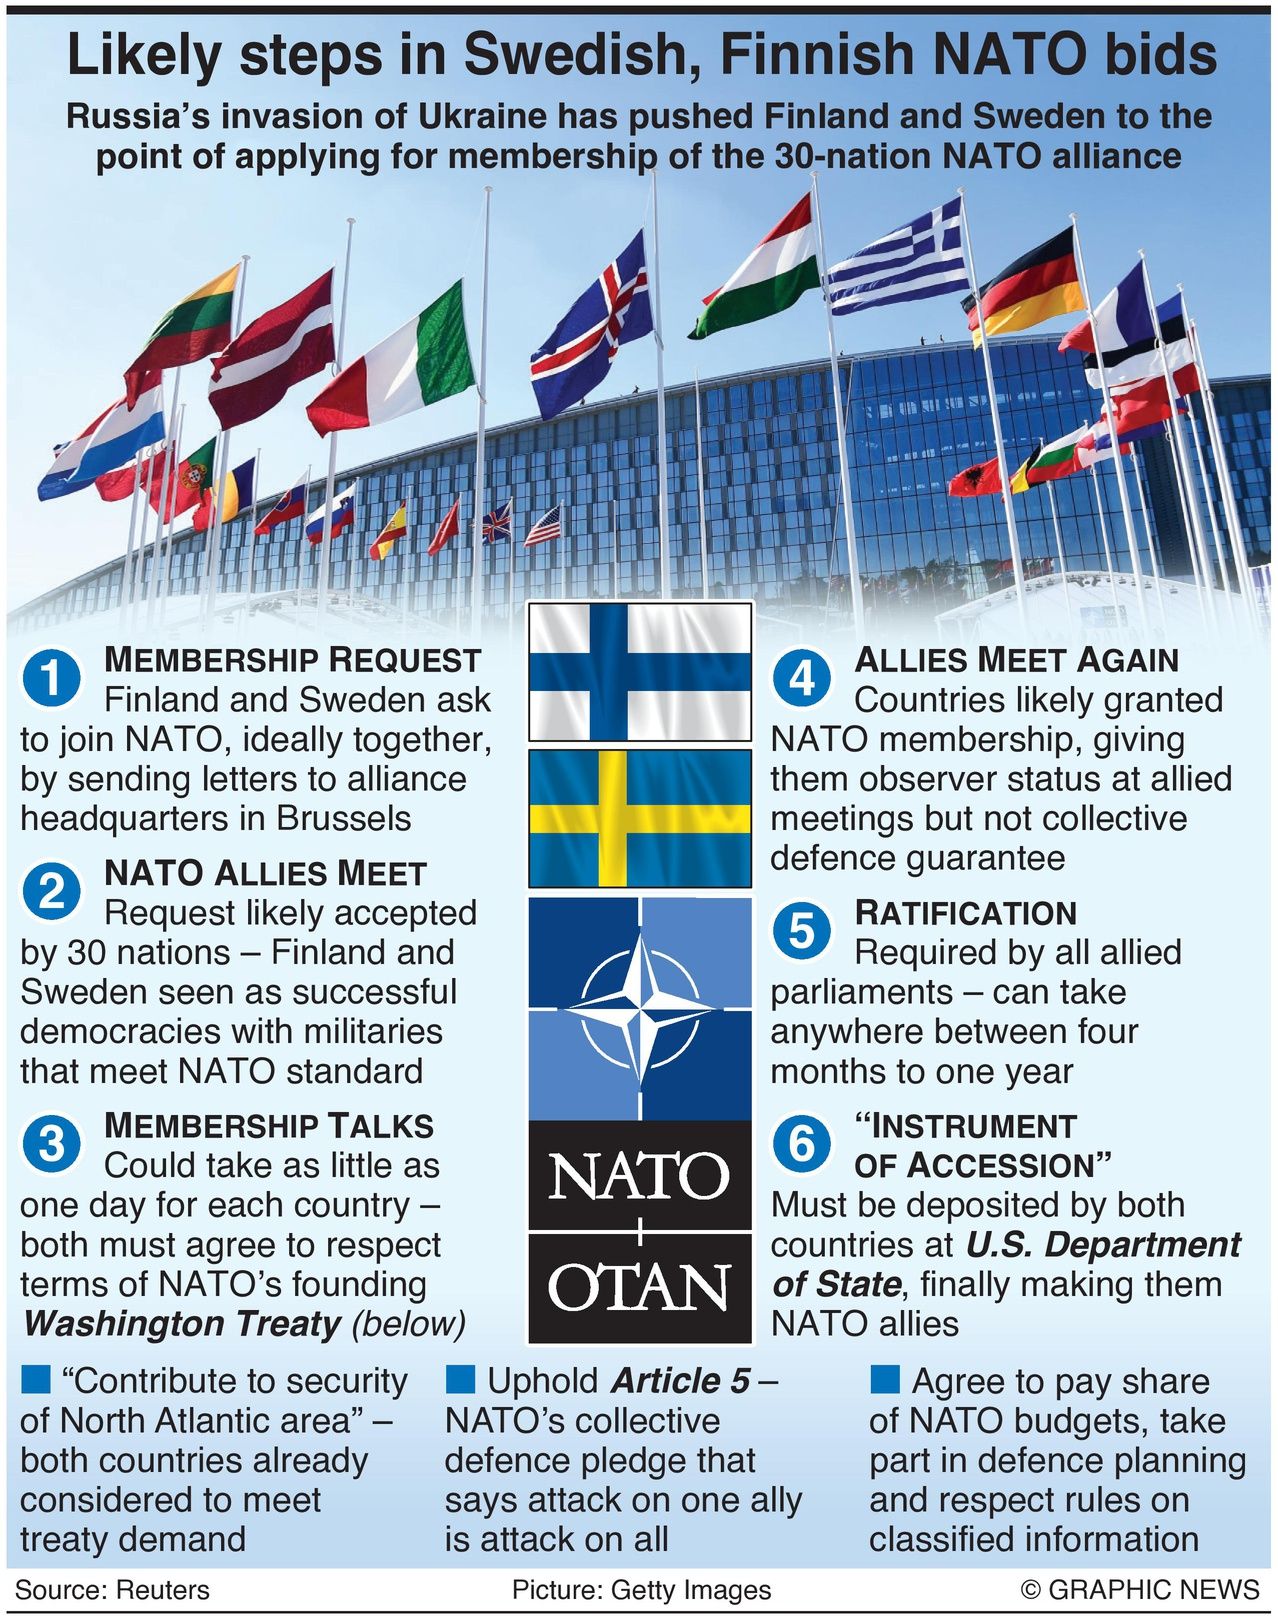 Infographic showing likely steps for Sweden and Finland to join NATO